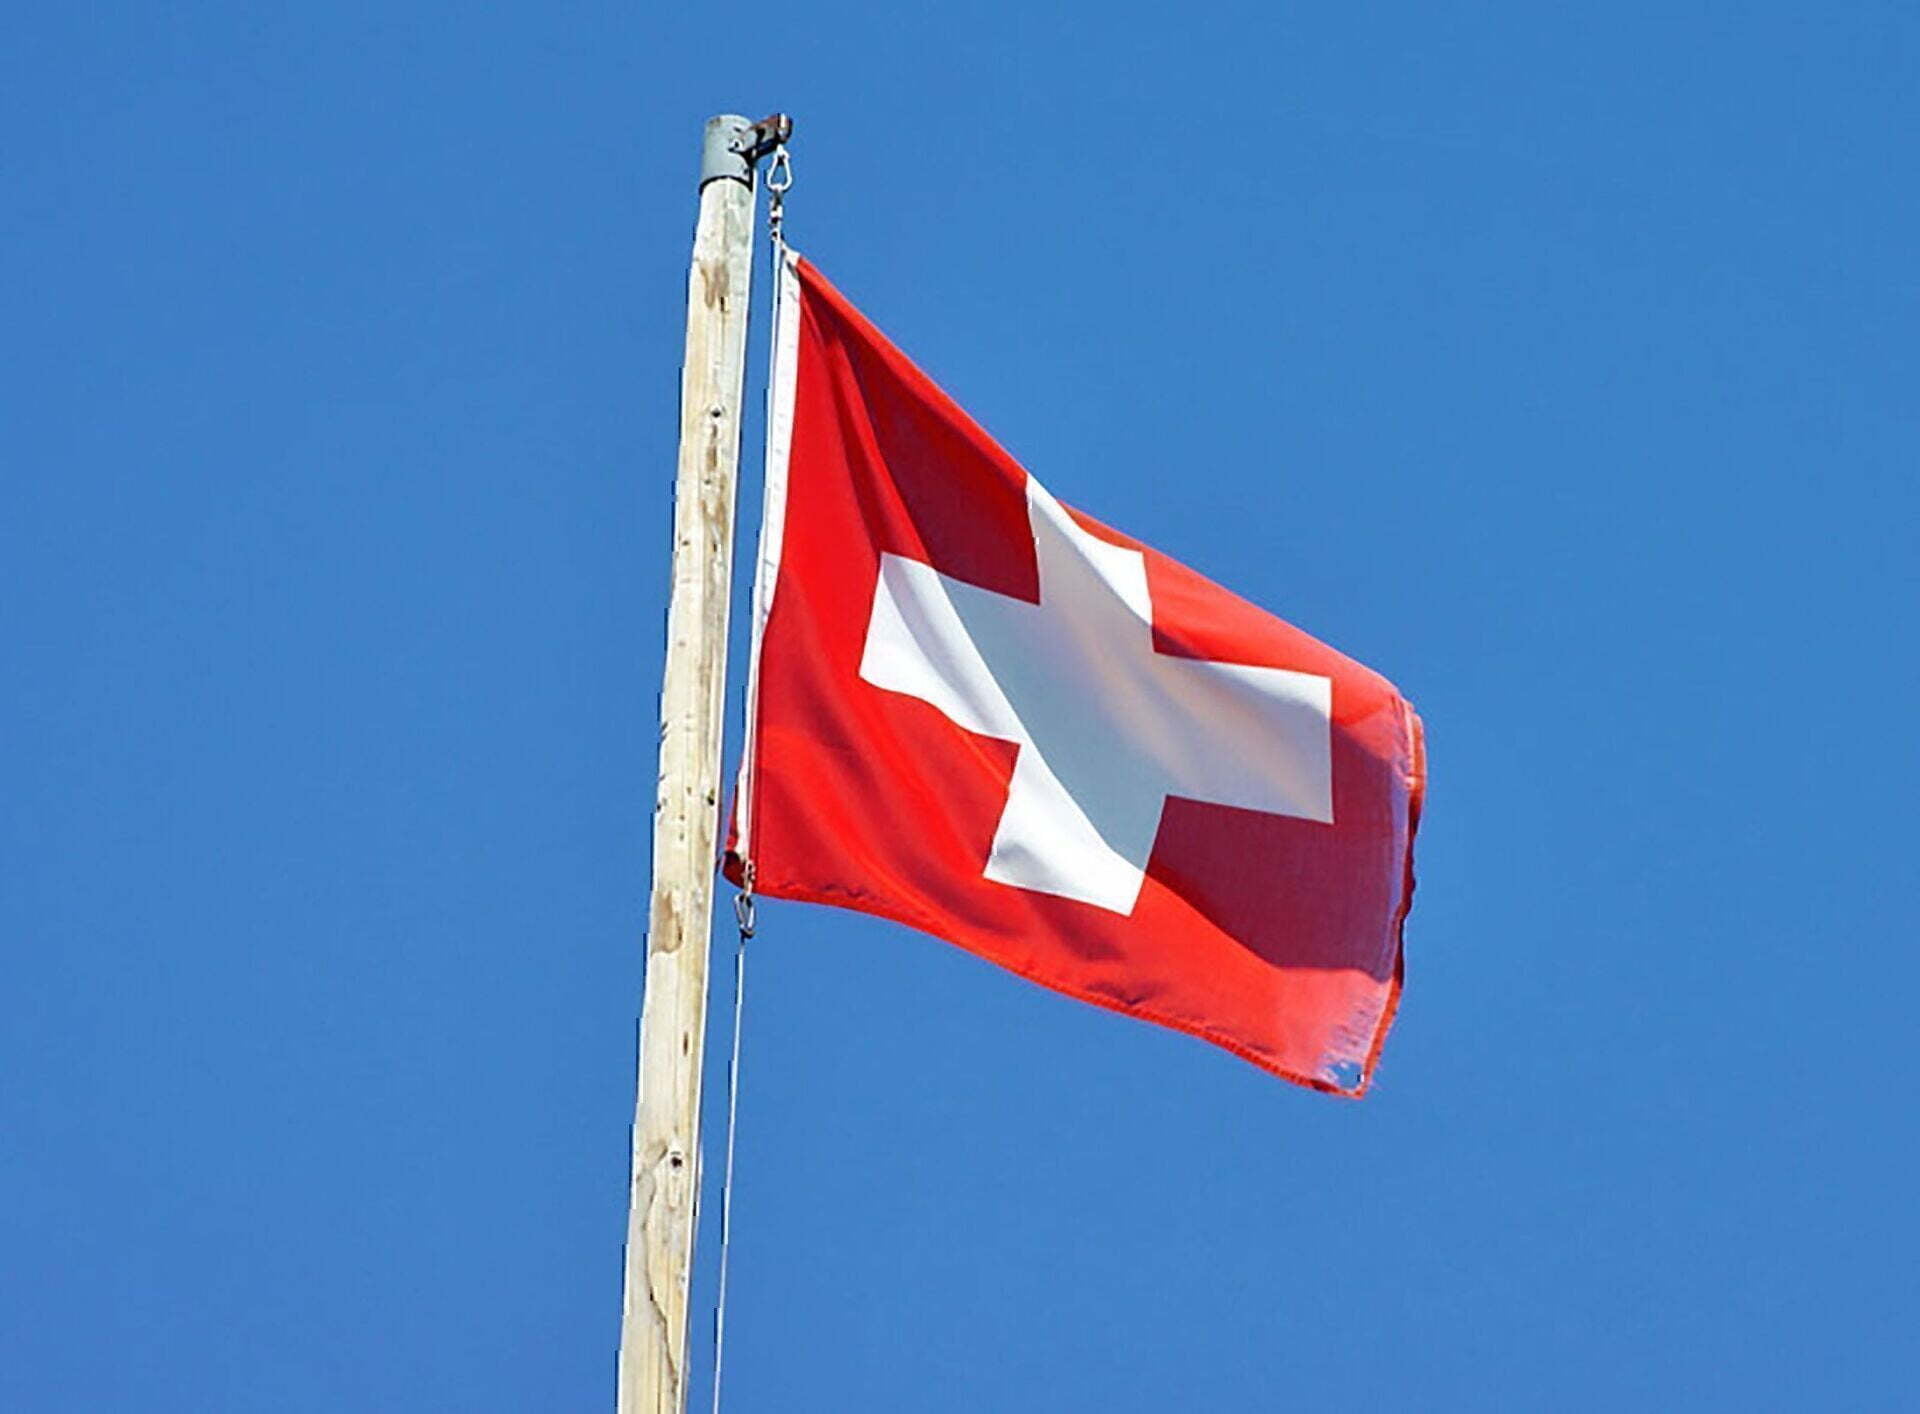 Swiss National Day, August 1st